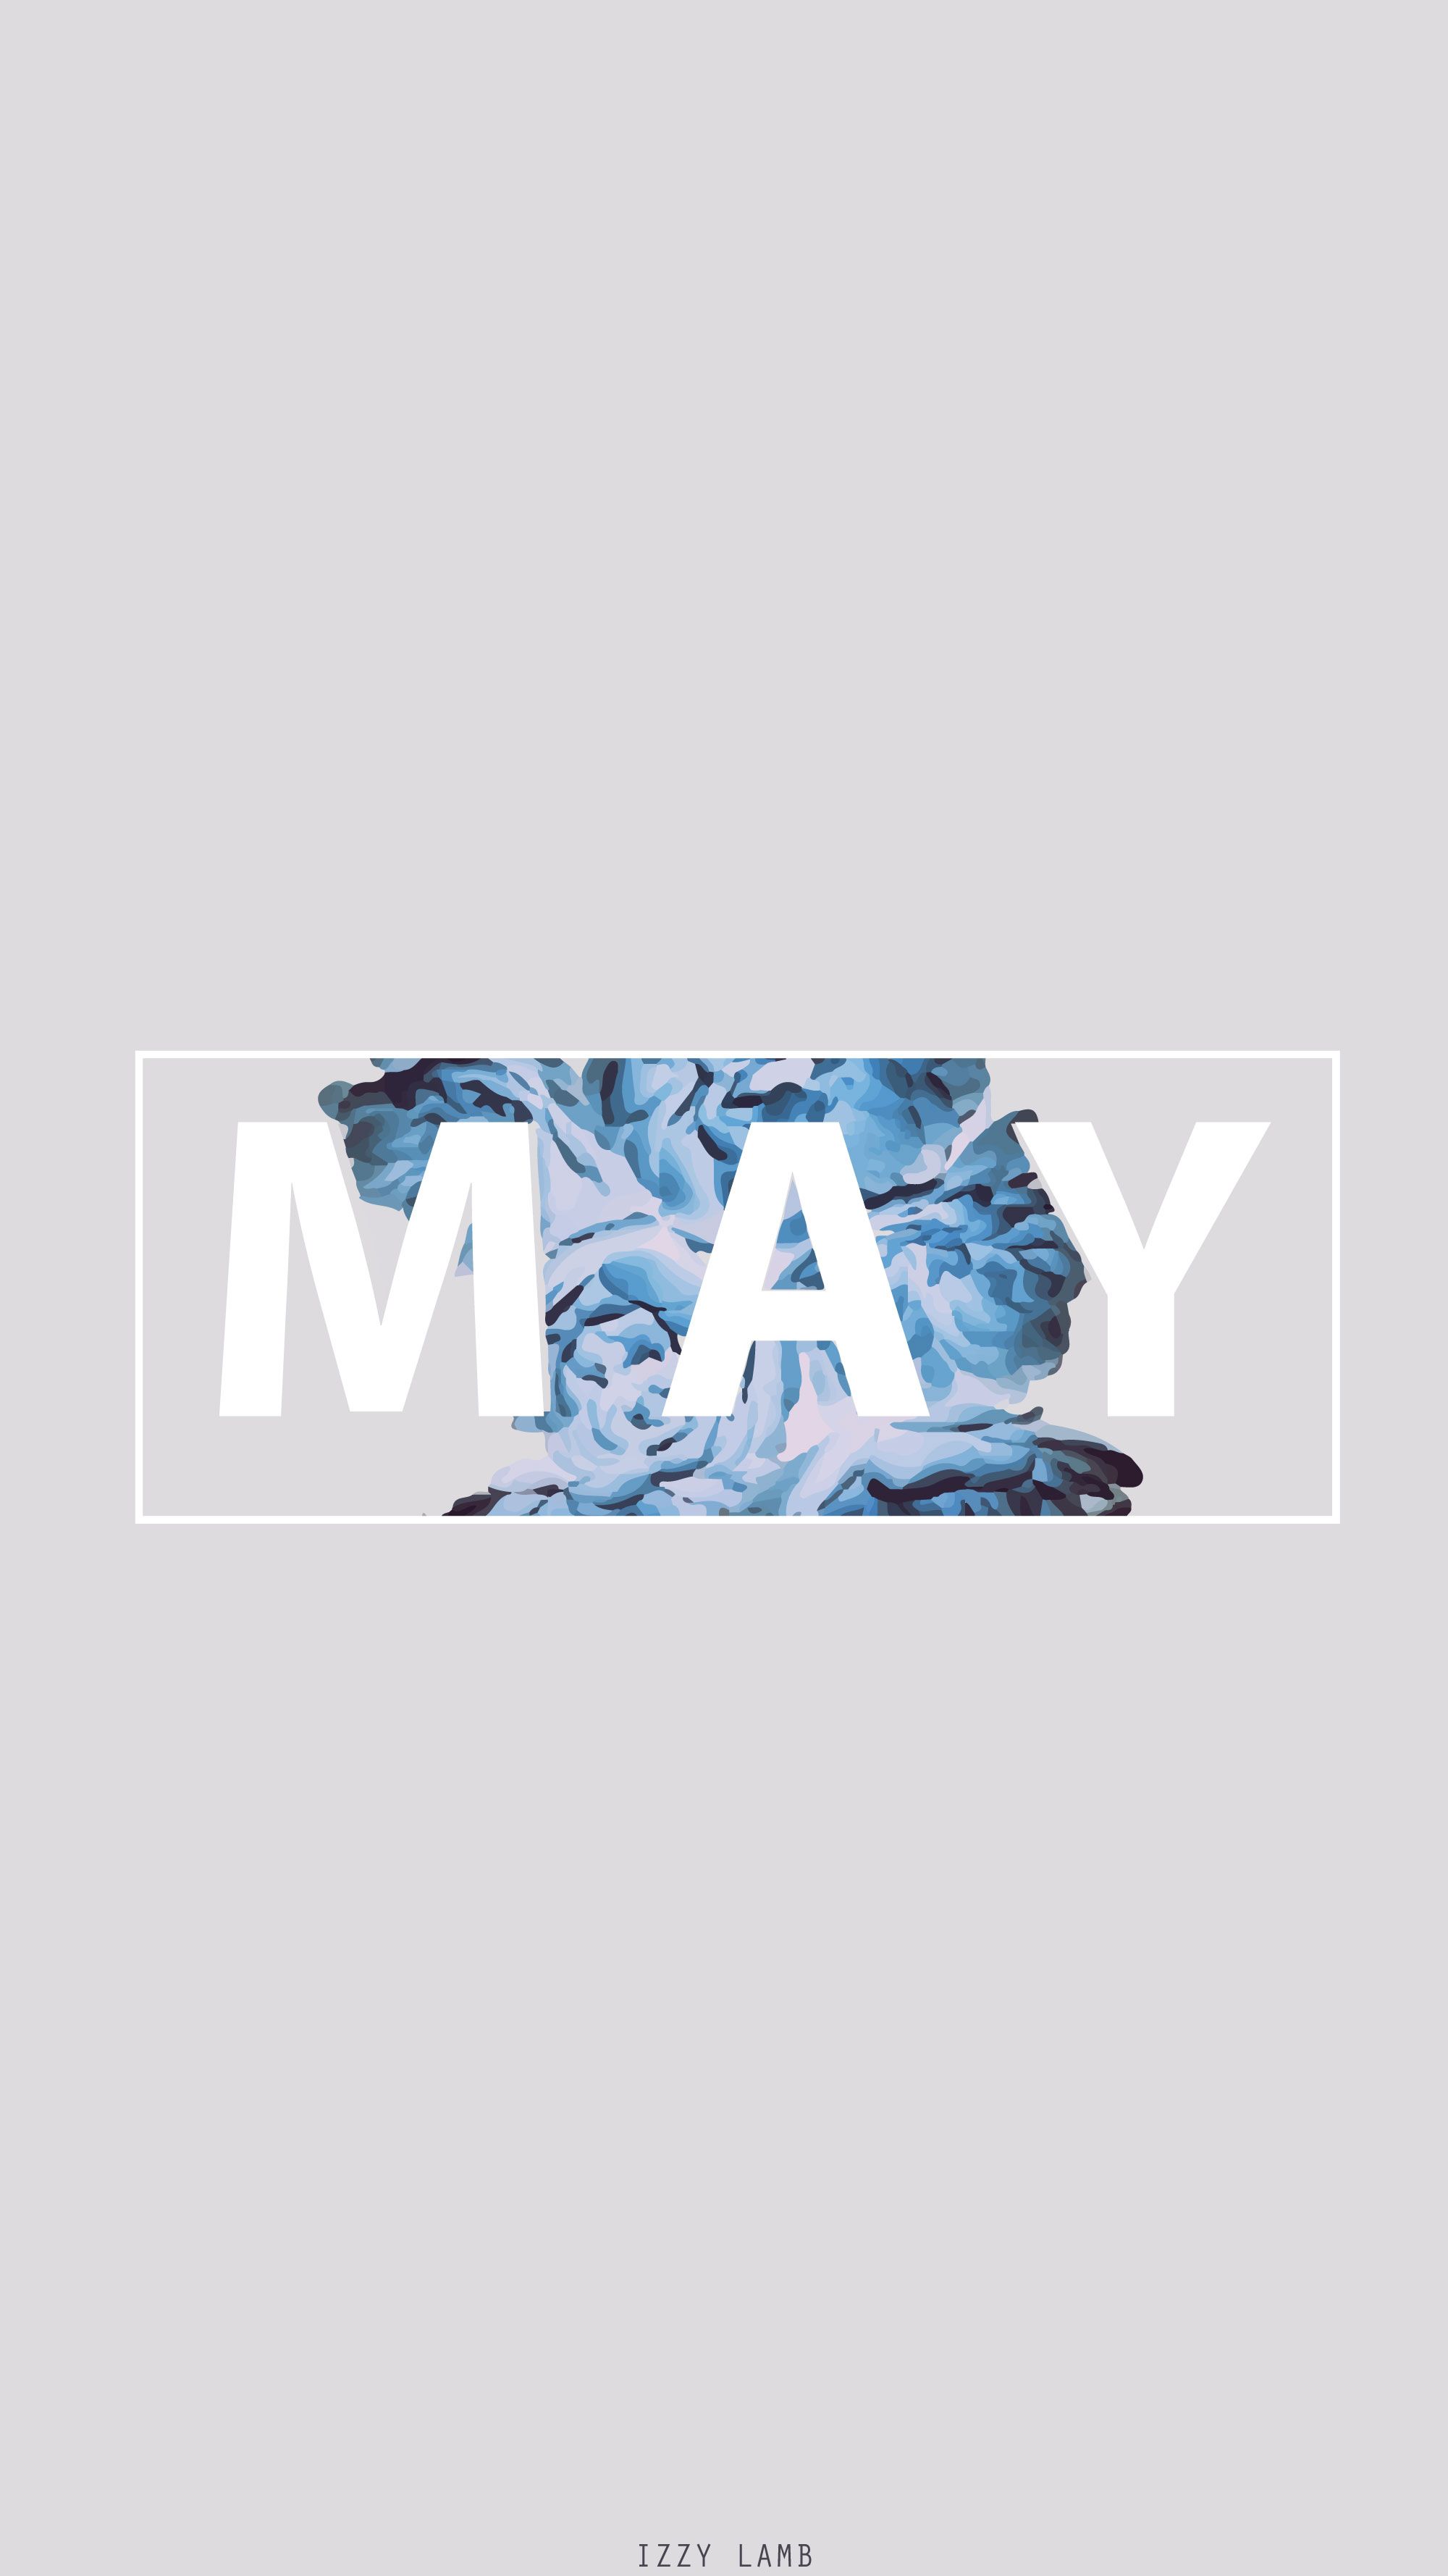 May wallpaper phone background by Izzz Lamb - May